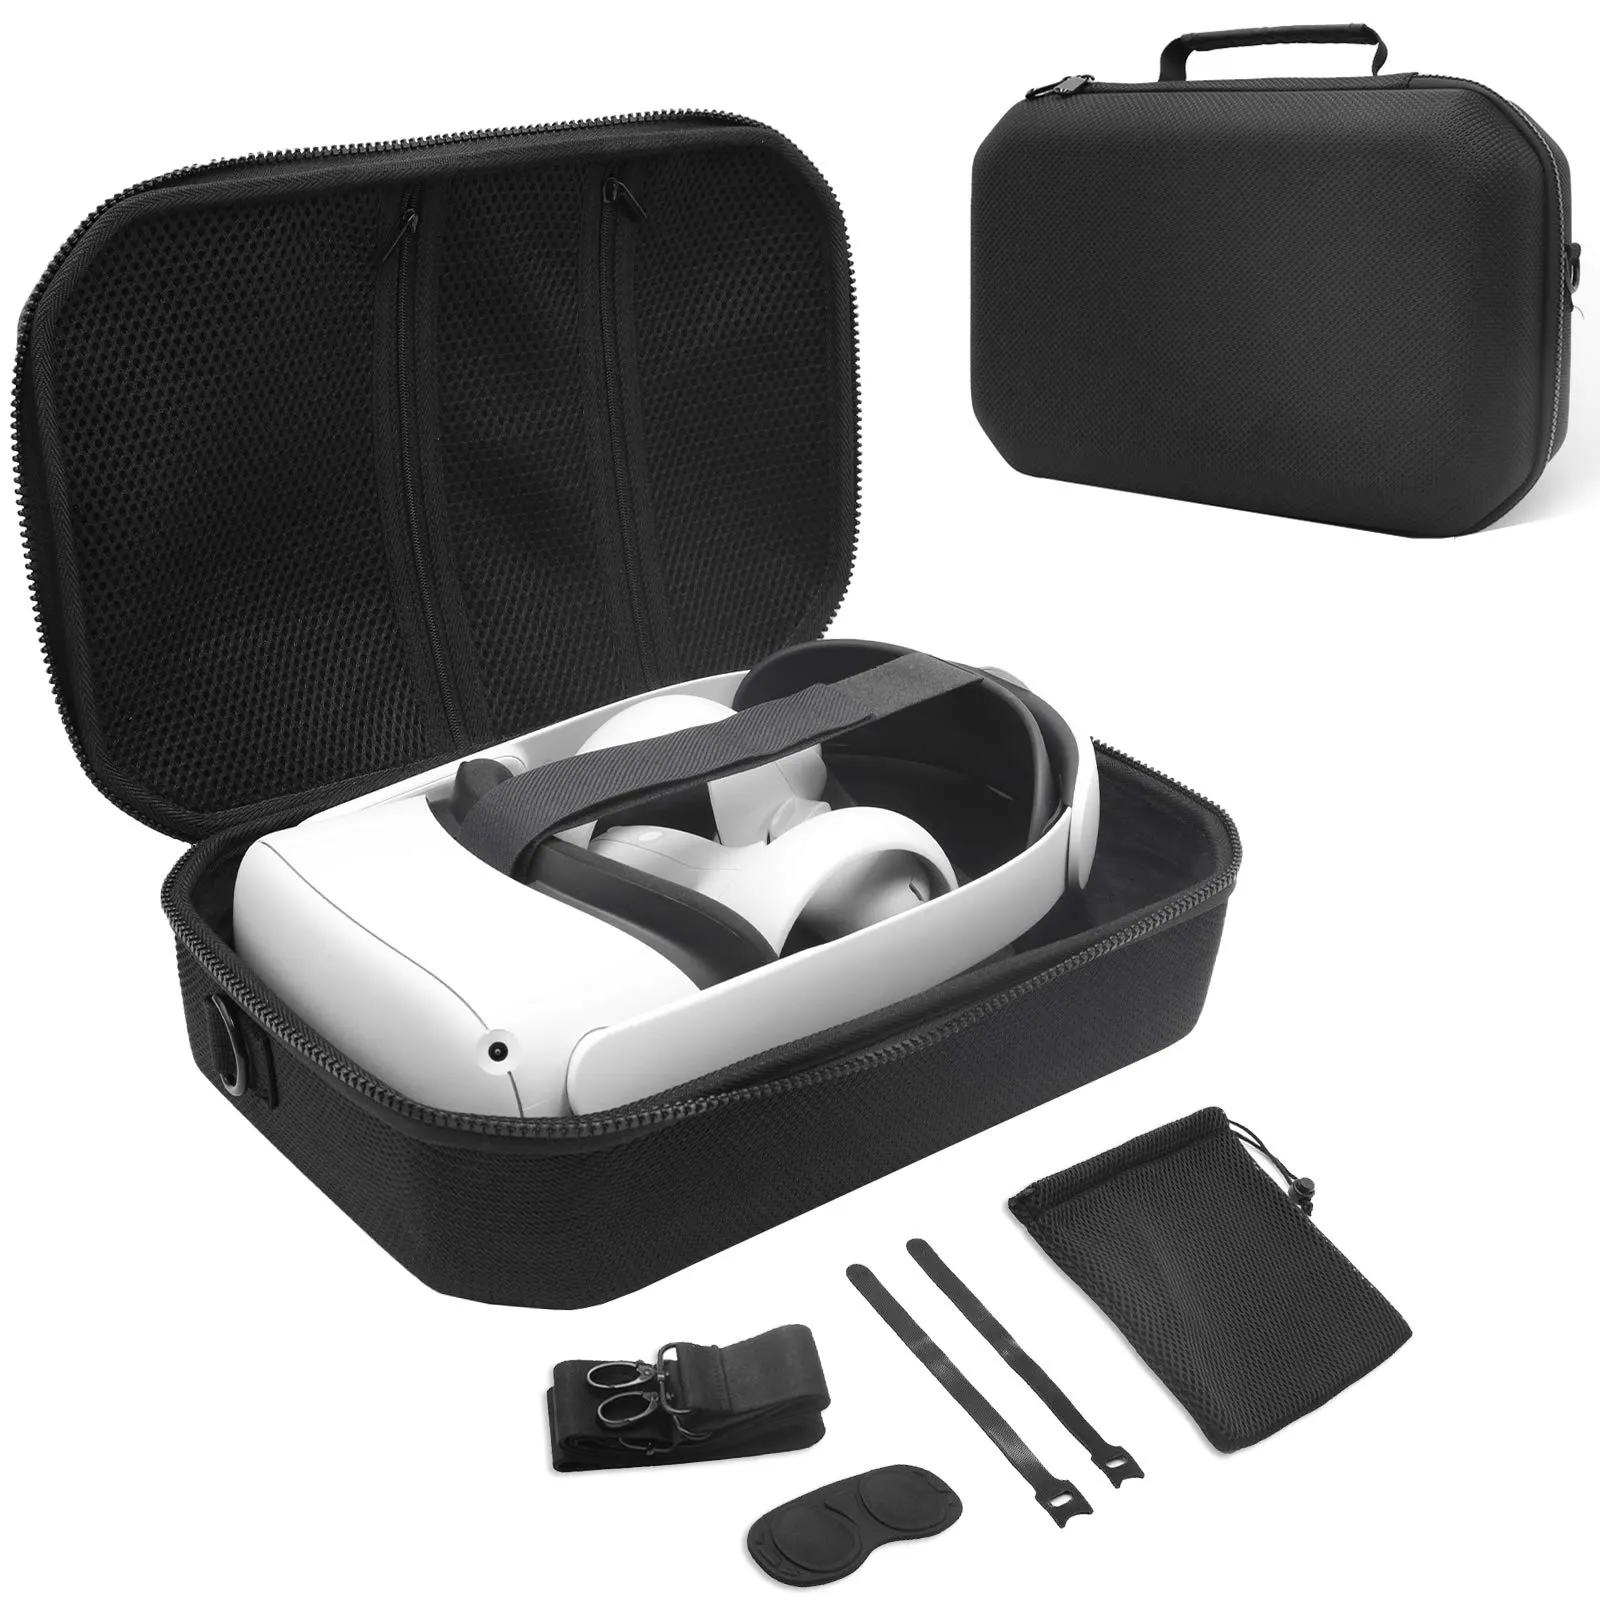 Hard Travel Case for VR Gaming Headset Controllers Accessories Shockproof EVA Hard Shell Carrying Case Storage